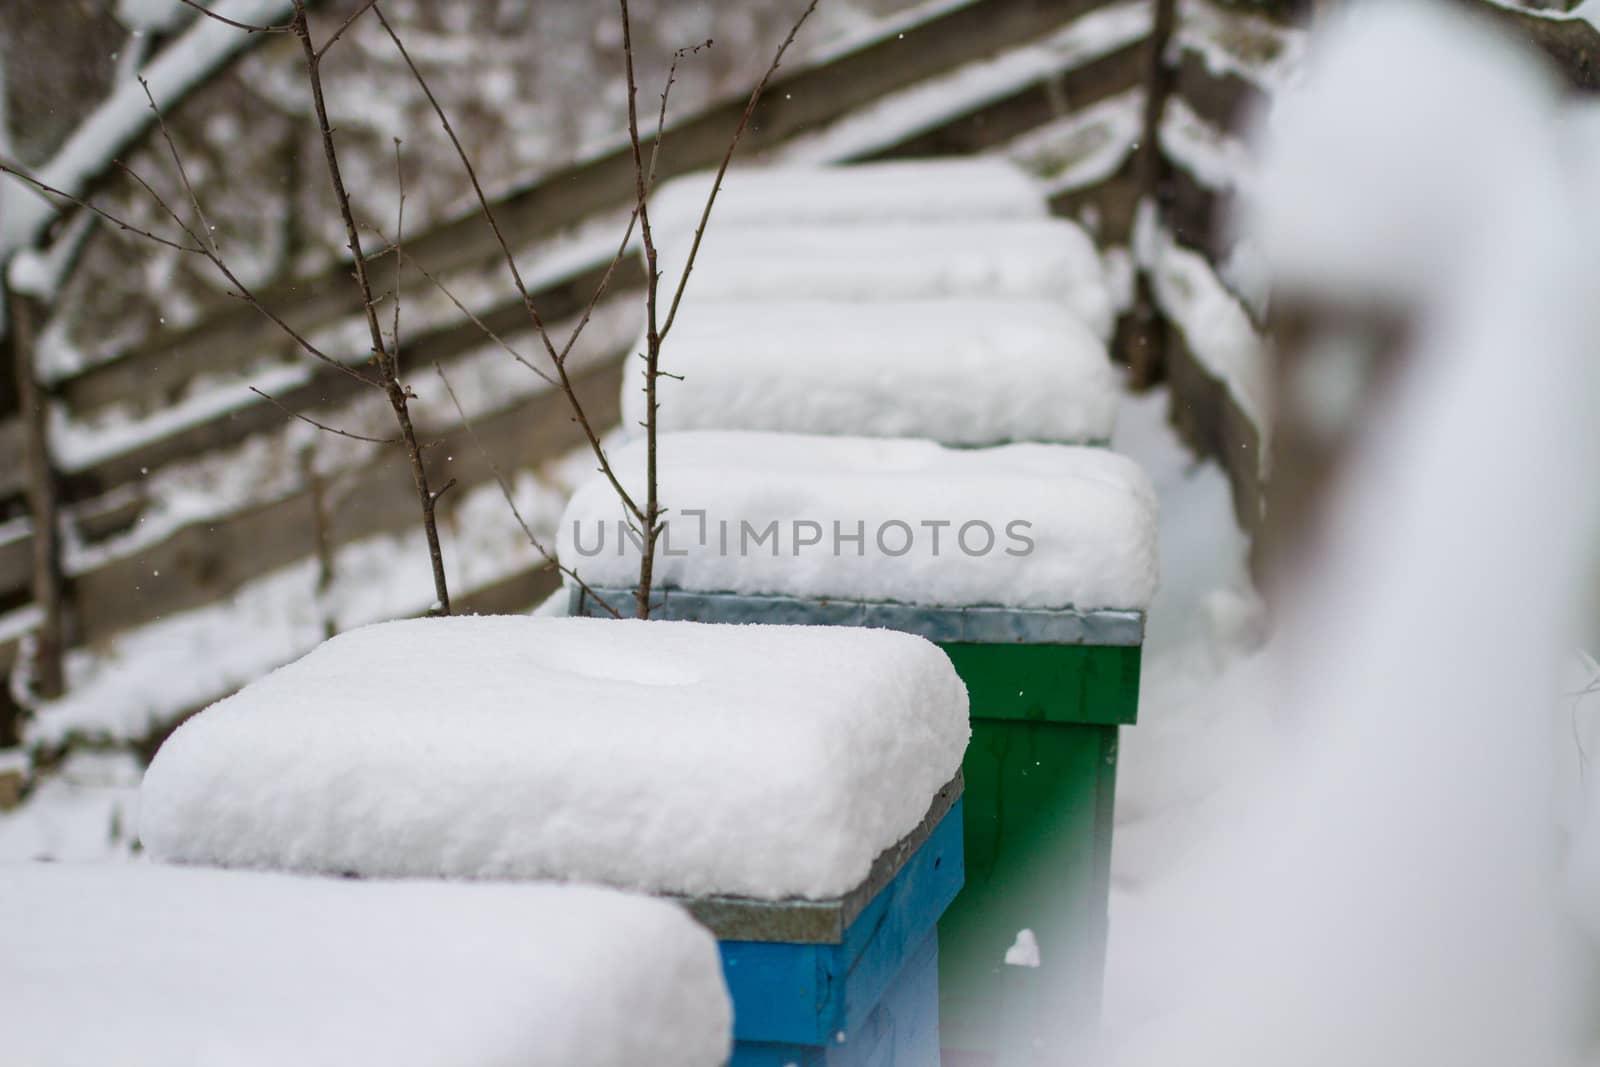 A pair of snow covered bee hives. Apiary in wintertime. Beehives covered with snow in wintertime. Beekeeping